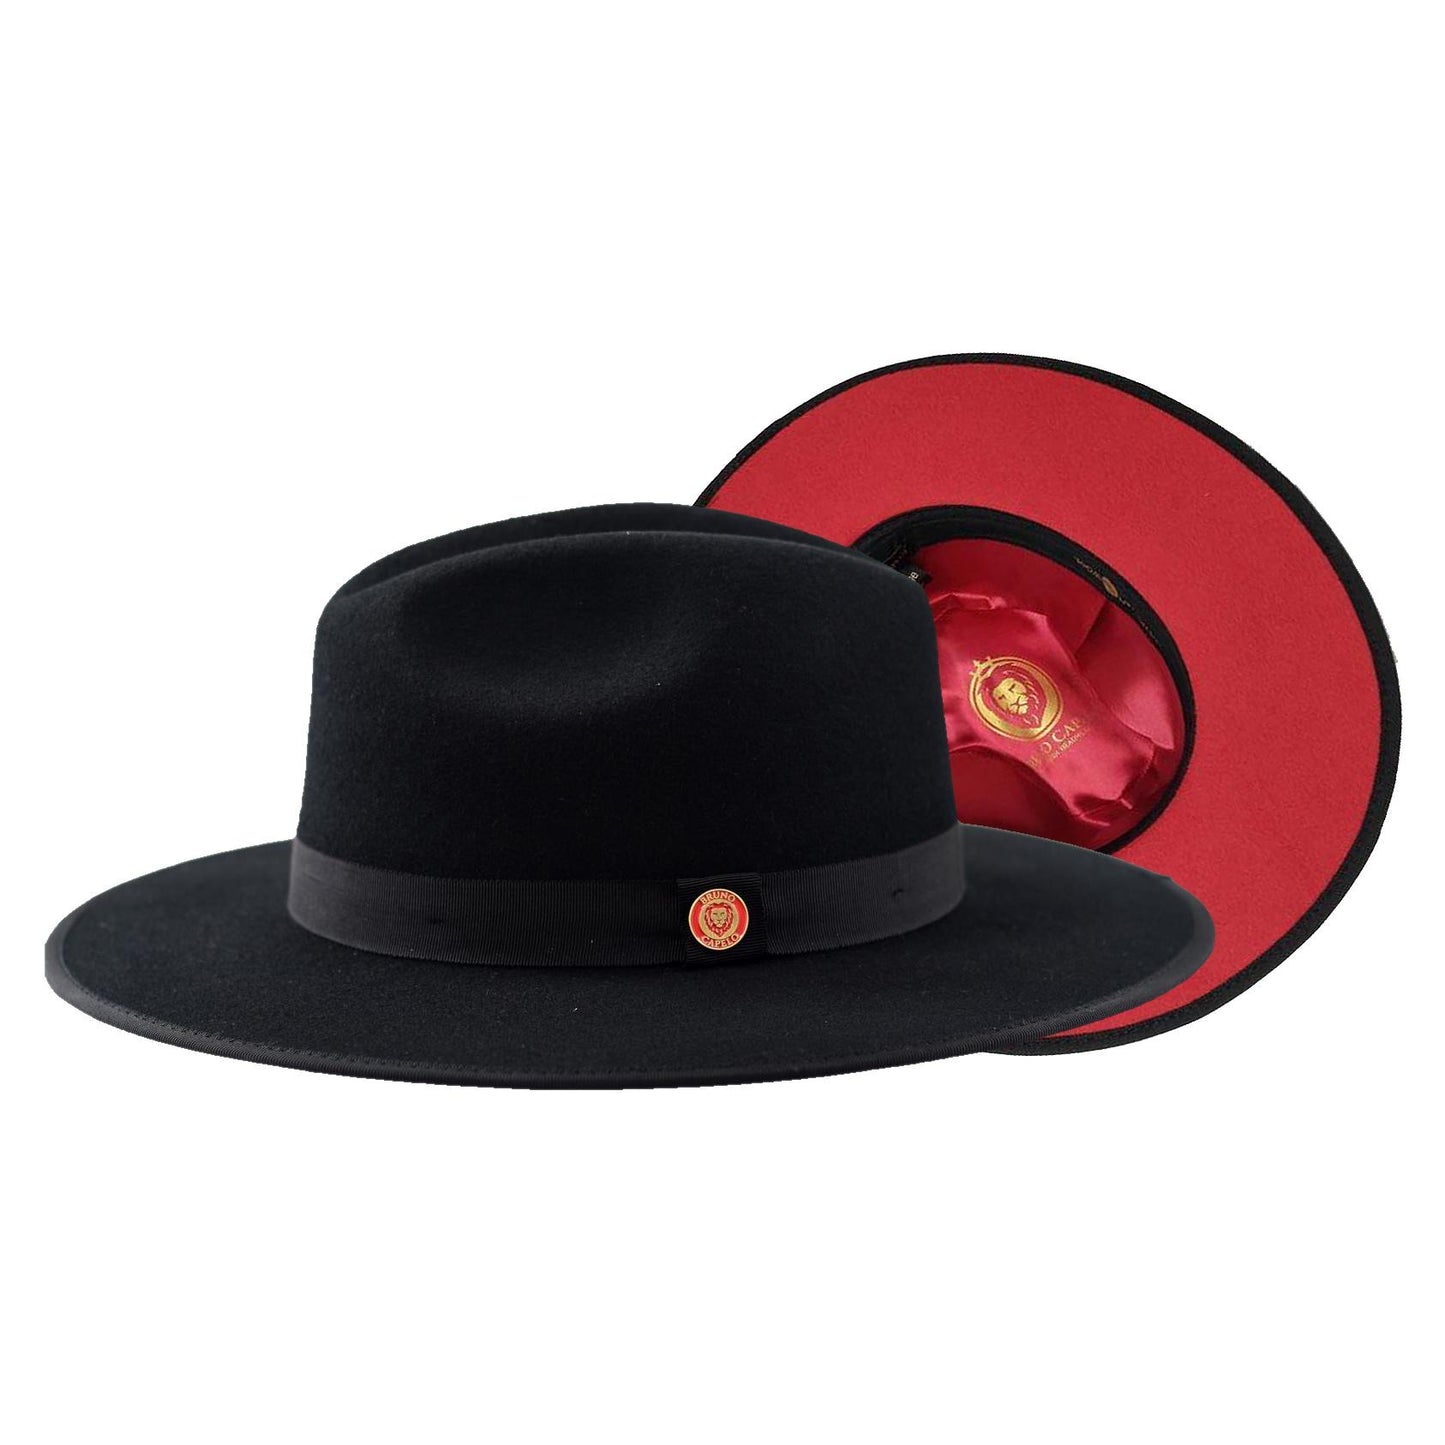 The Don wide brim Hat